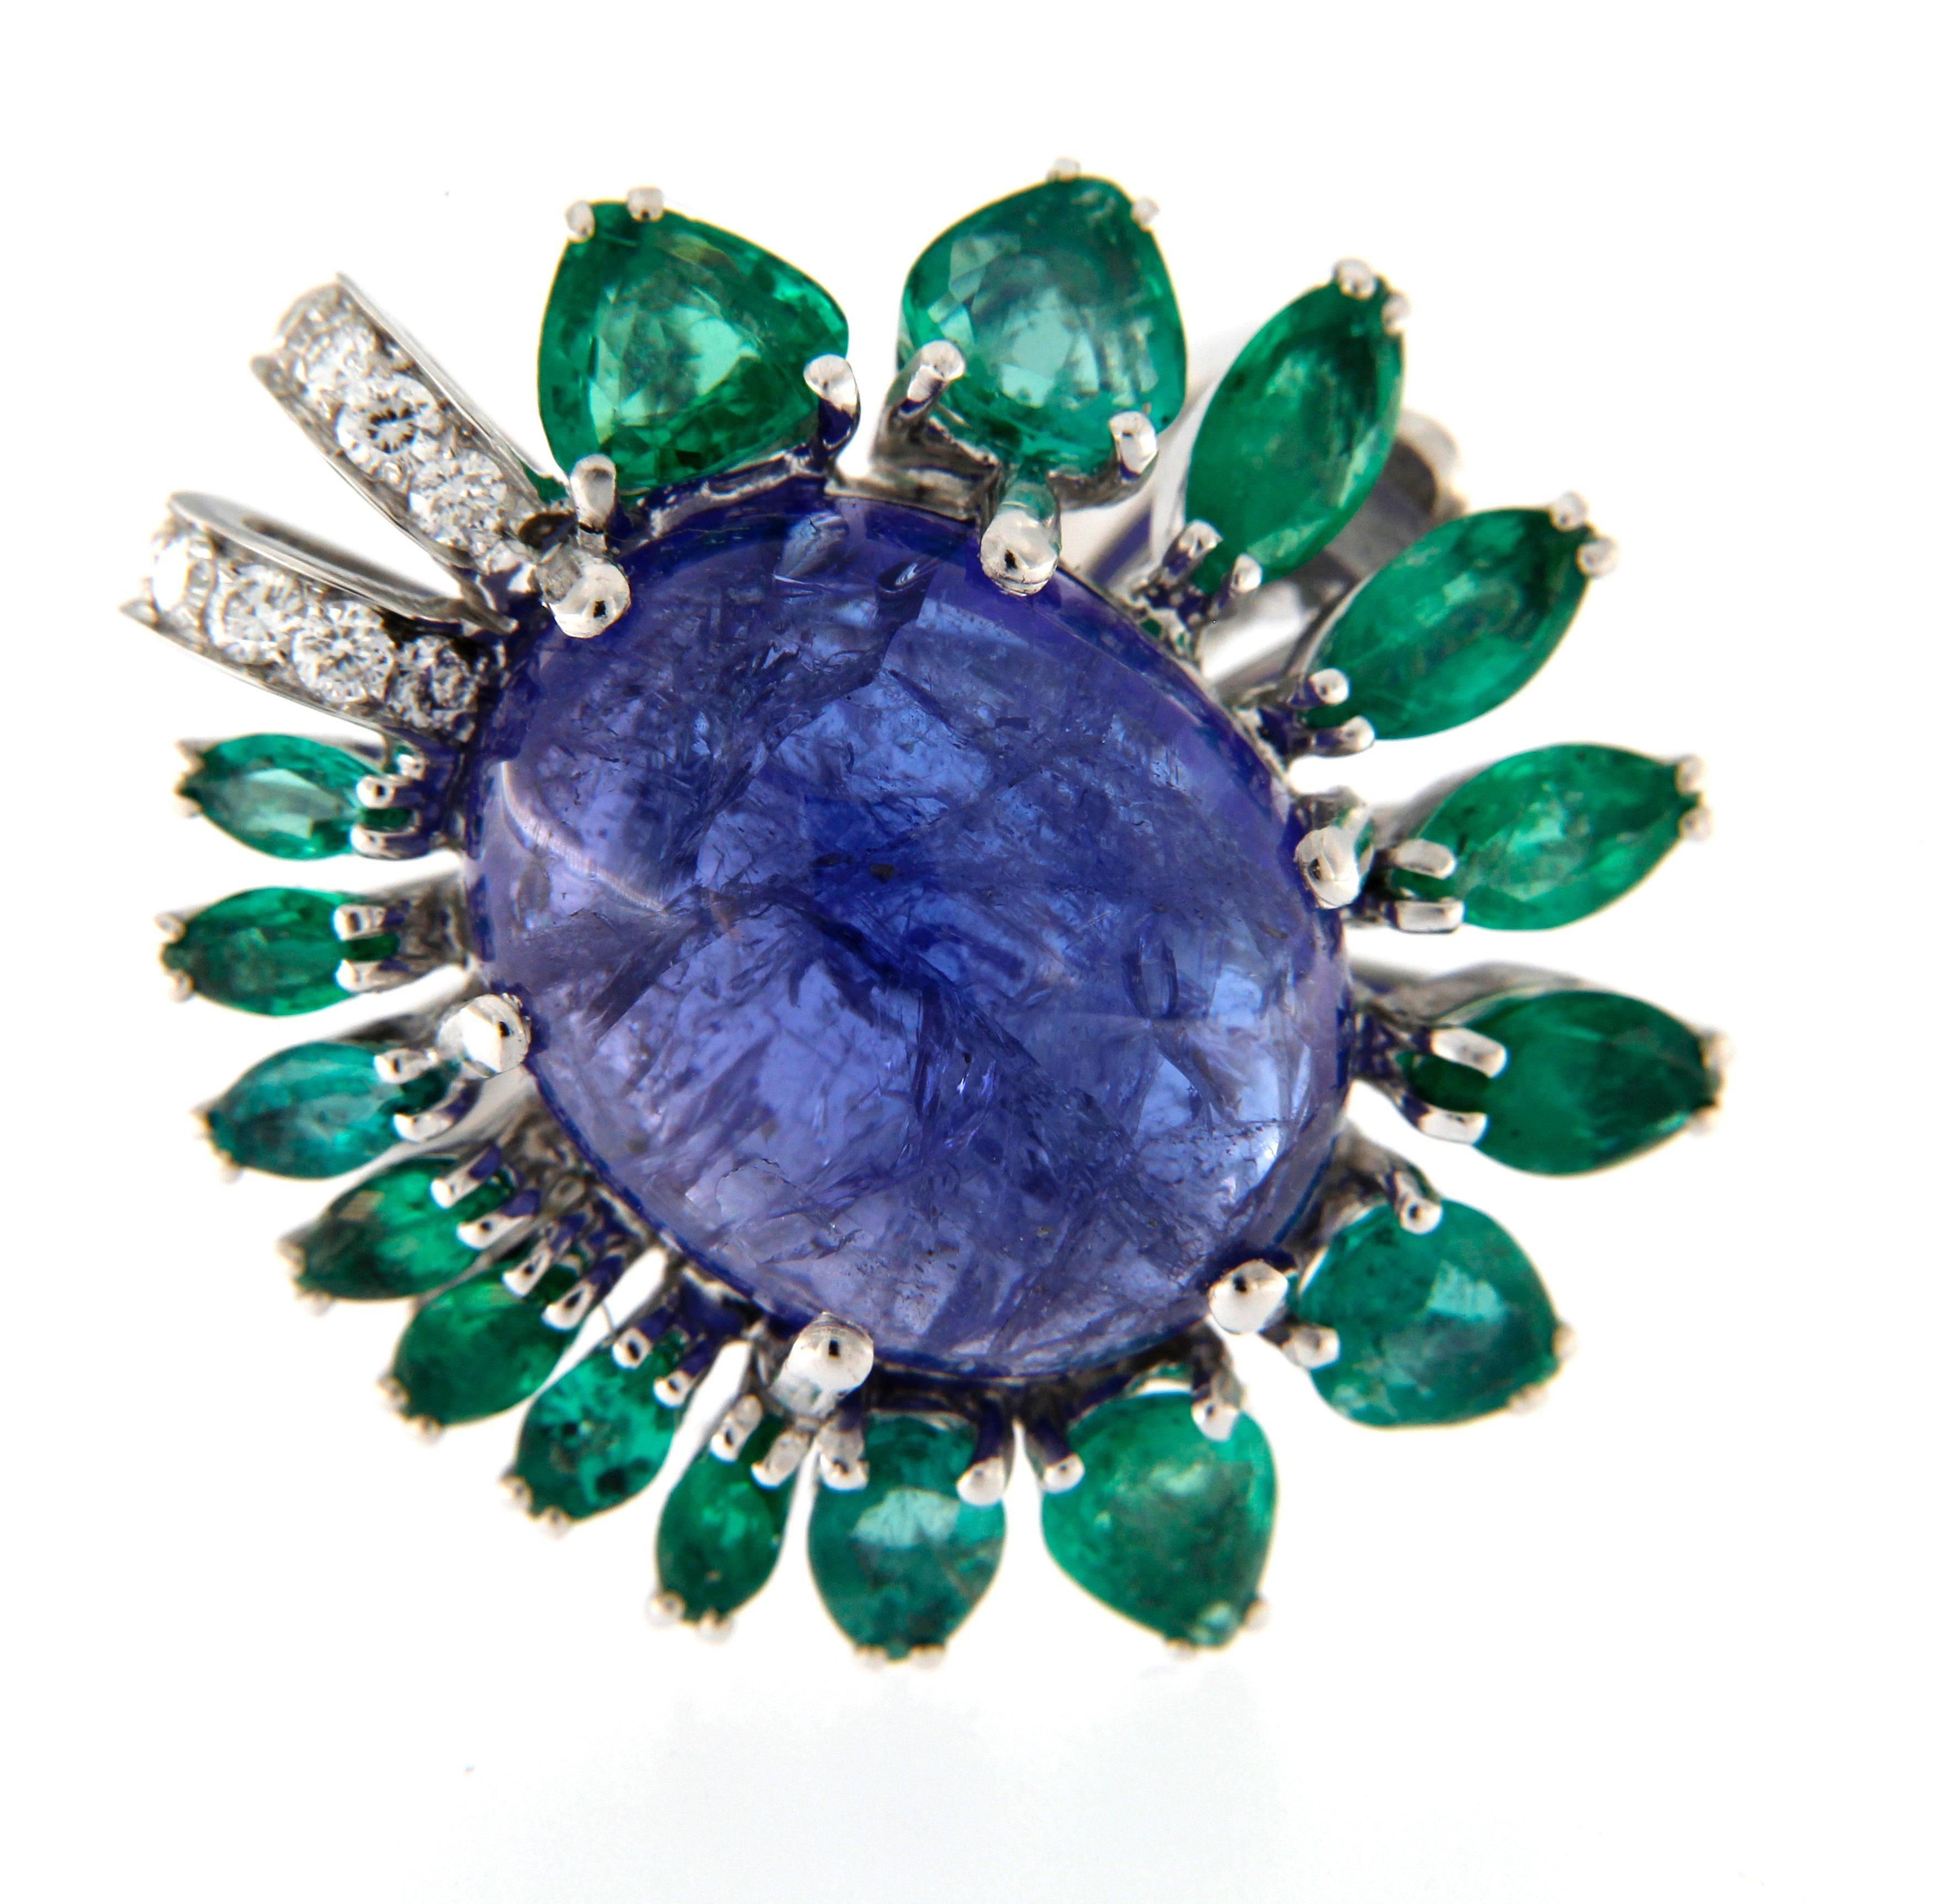 Own production, huge cabochon cut Tanzanite ct. 12.73 , surrounded by Colombian Emeralds ct. 3.07 and full round cut diamonds ct. 0.17
the ring can be sized before shipping